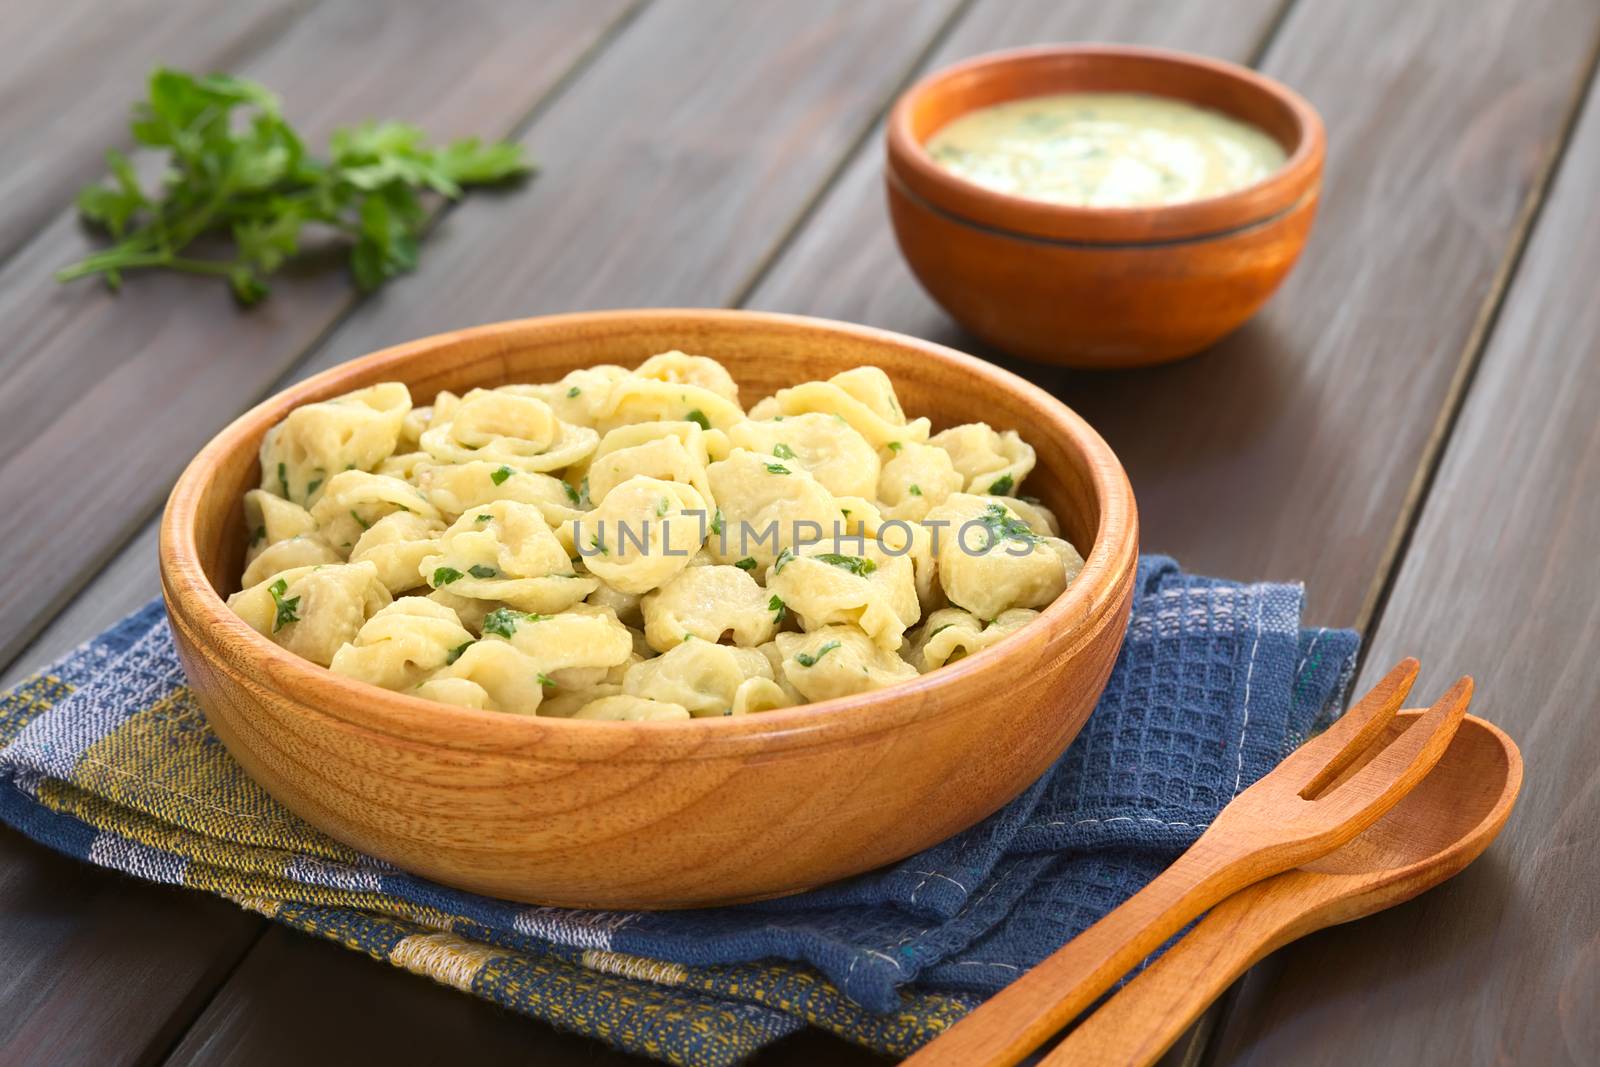 Cooked Tortellini with Parsley Cream Sauce by ildi